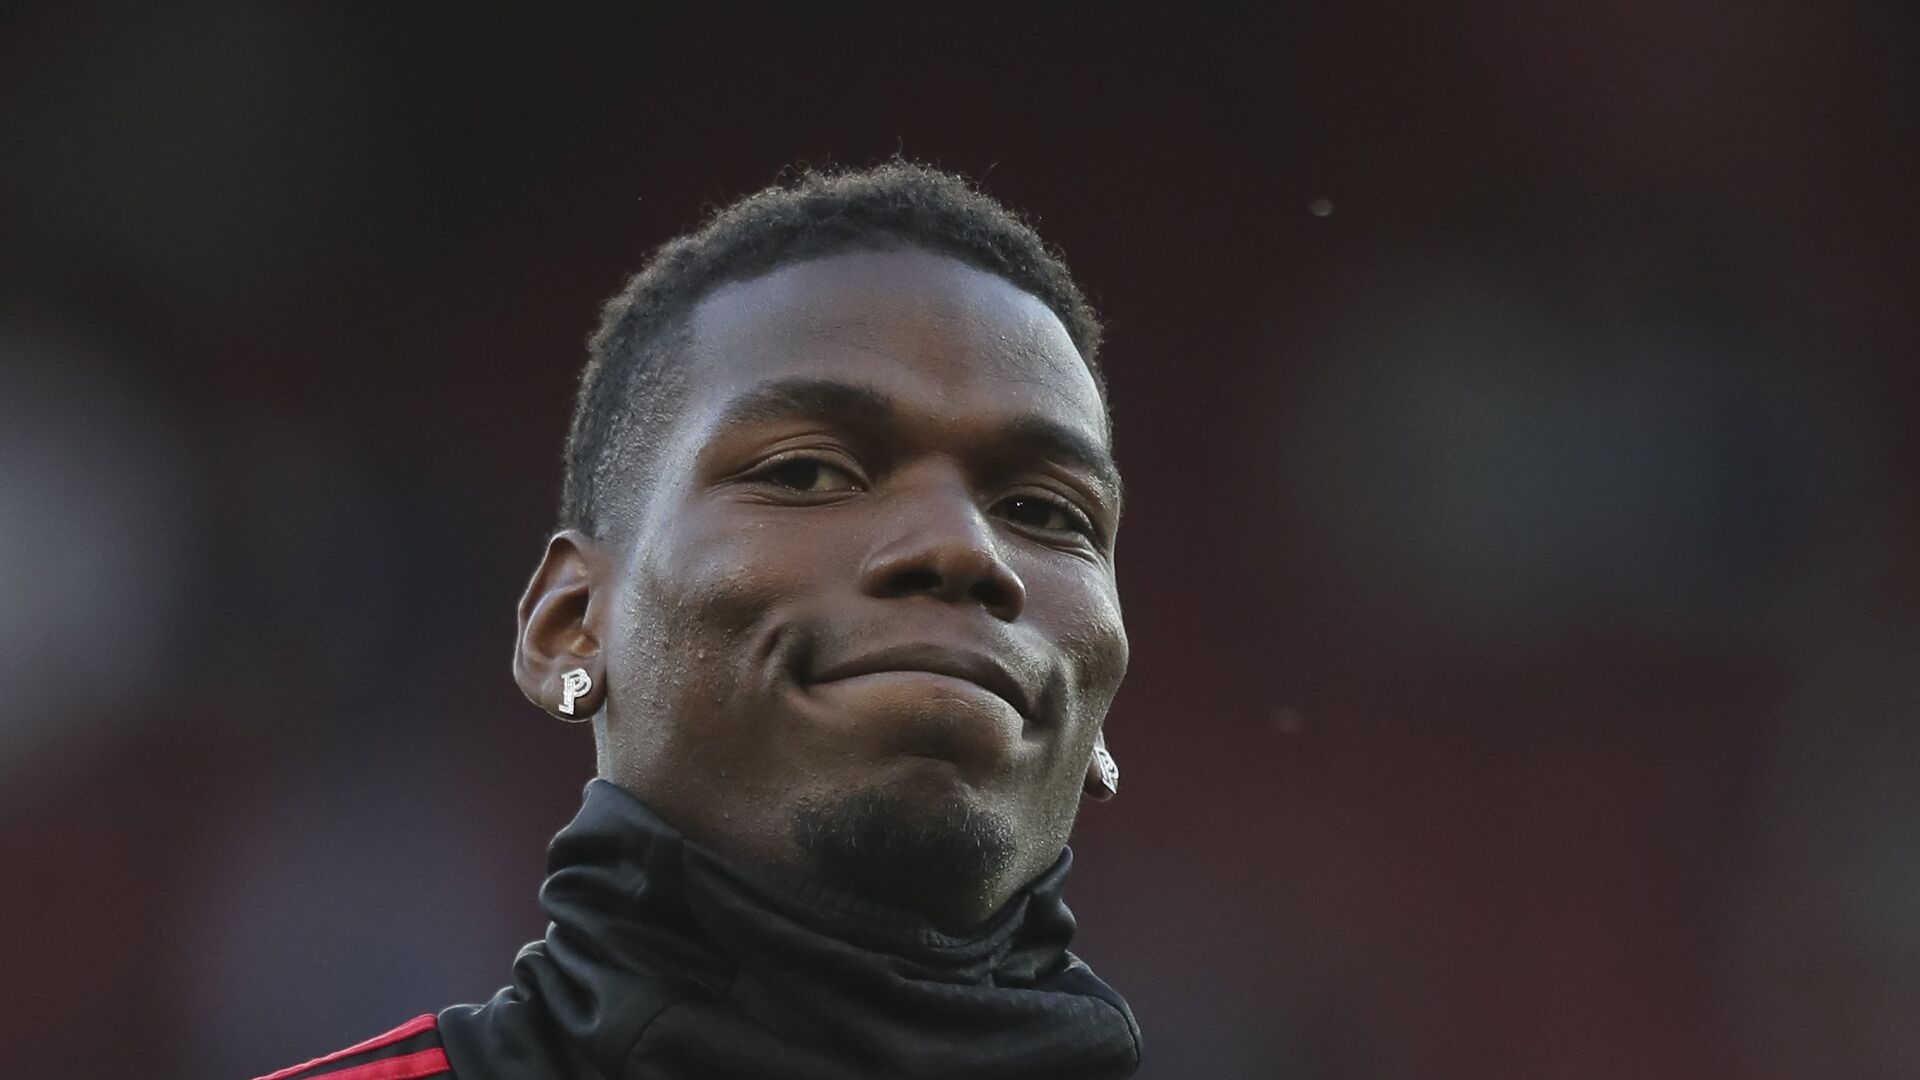 Manchester United's Paul Pogba applauds the fans as he takes part in the warm up prior to the start of the English Premier League soccer match between Manchester United and Leicester City at Old Trafford, in Manchester, England, Friday, Aug. 10, 2018 - اسپوتنیک افغانستان  , 1920, 11.06.2022